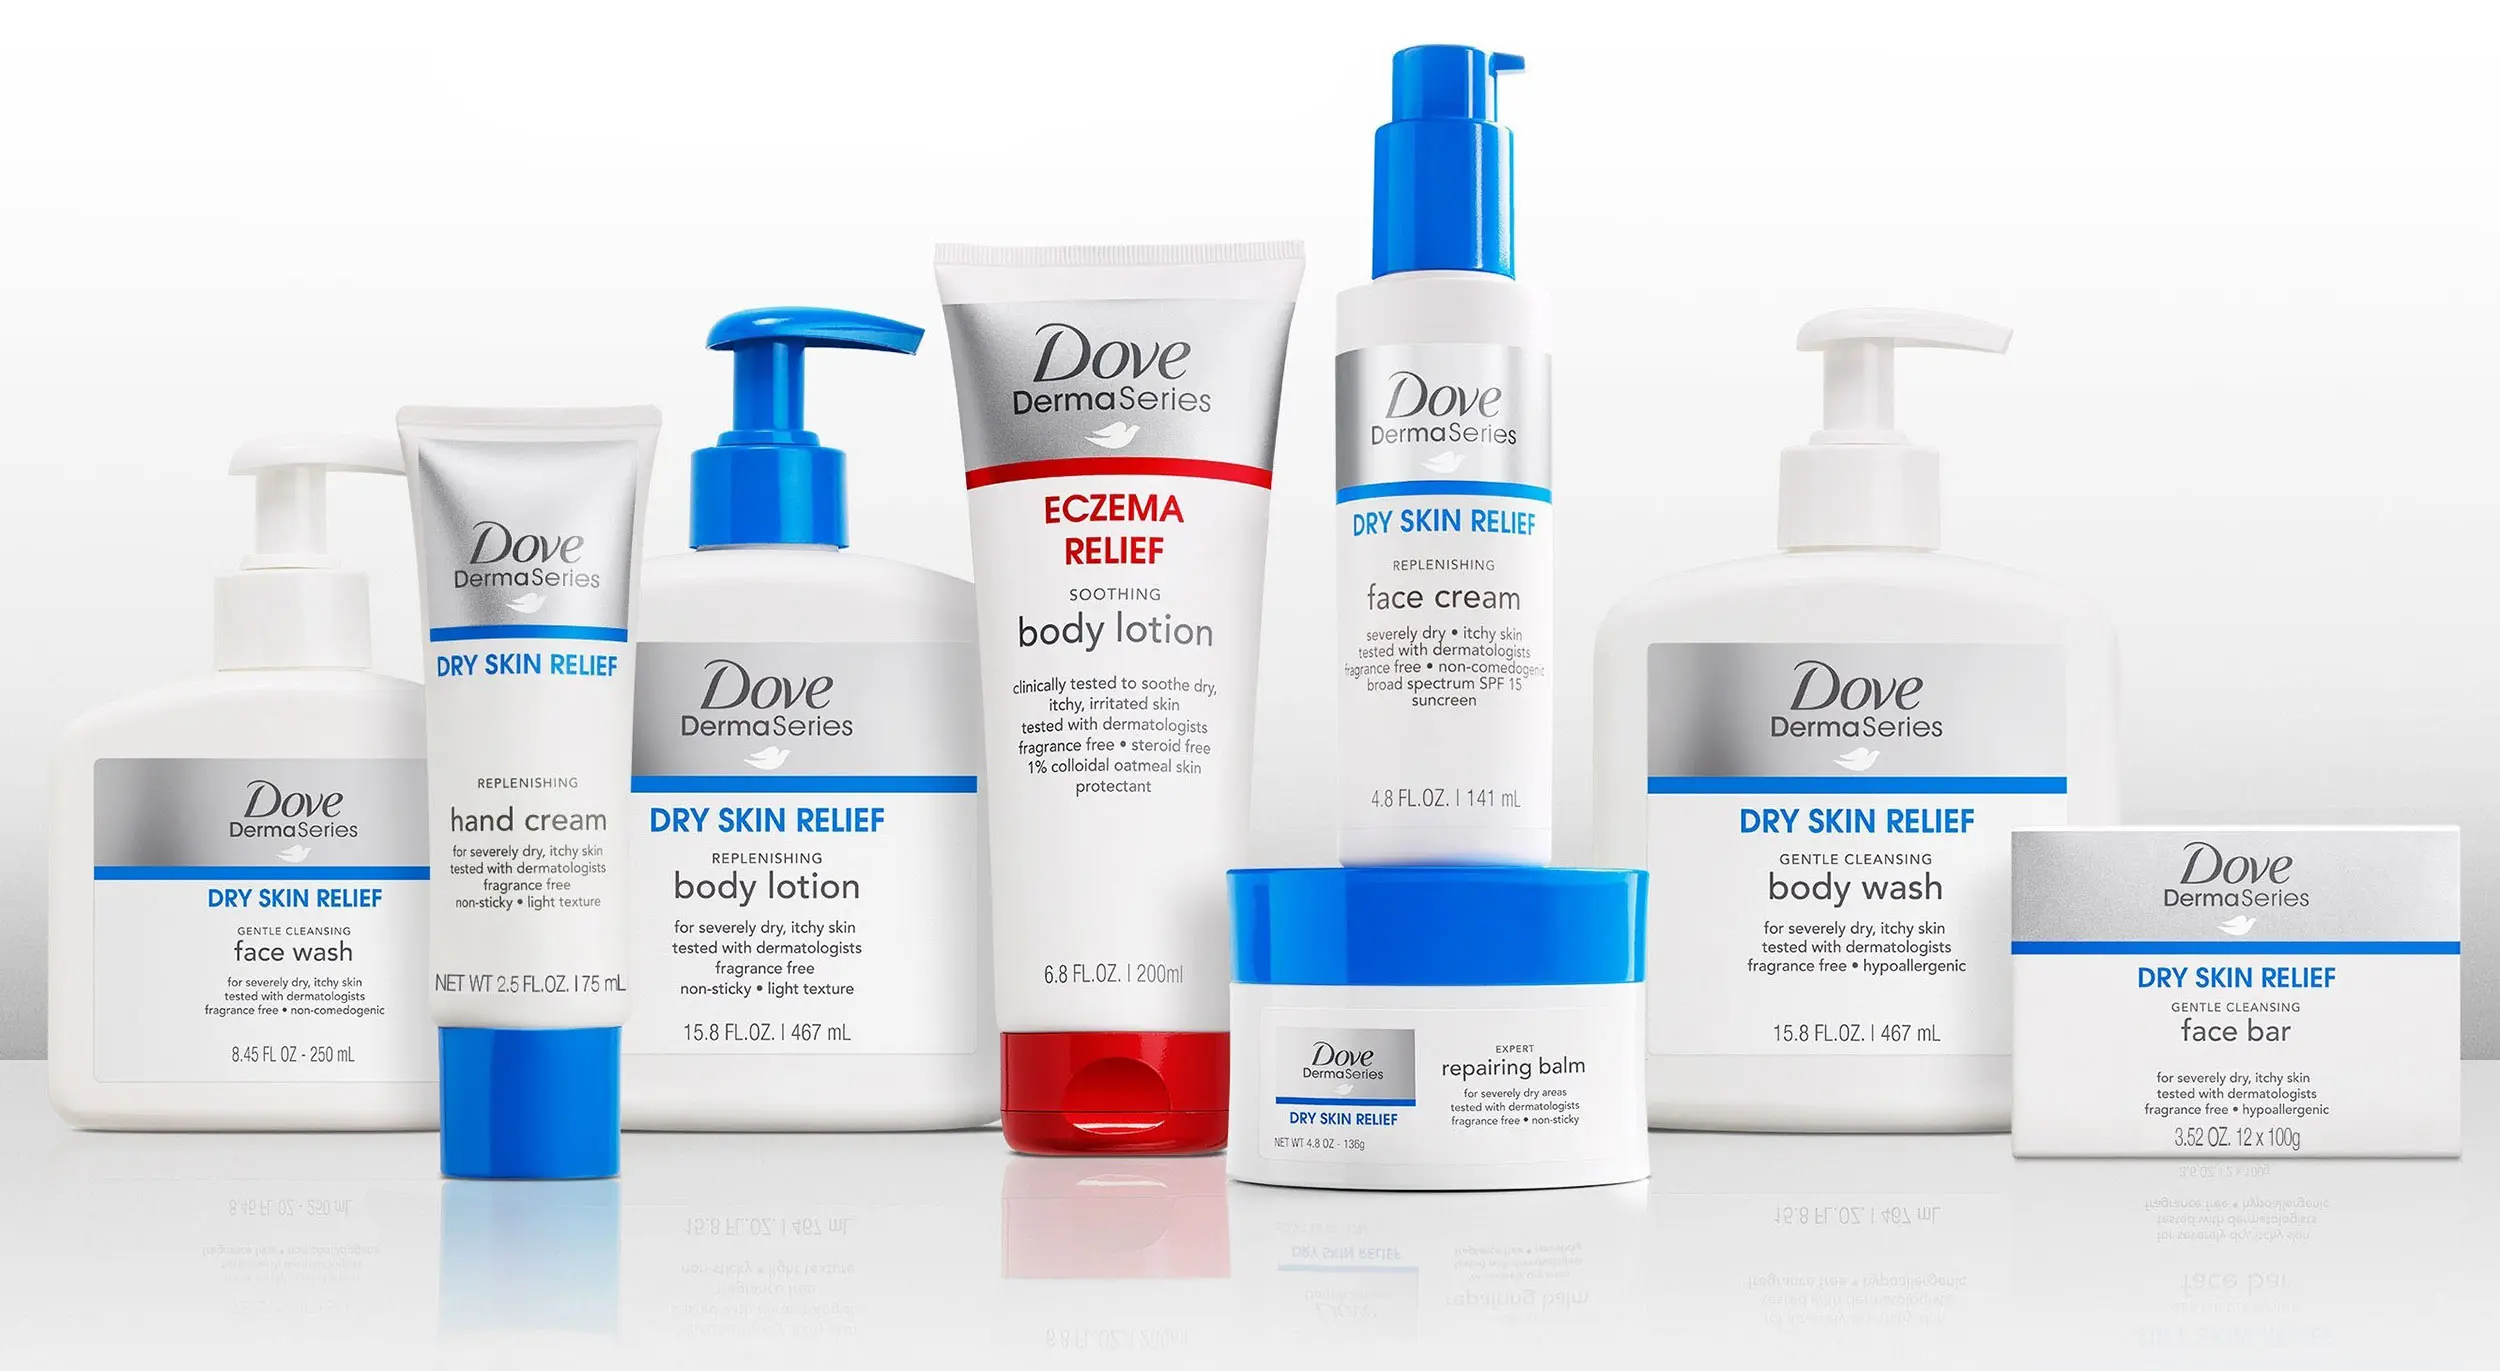 Unilever is leveraging one of its strongest personal care brands Dove to take on climate action. 